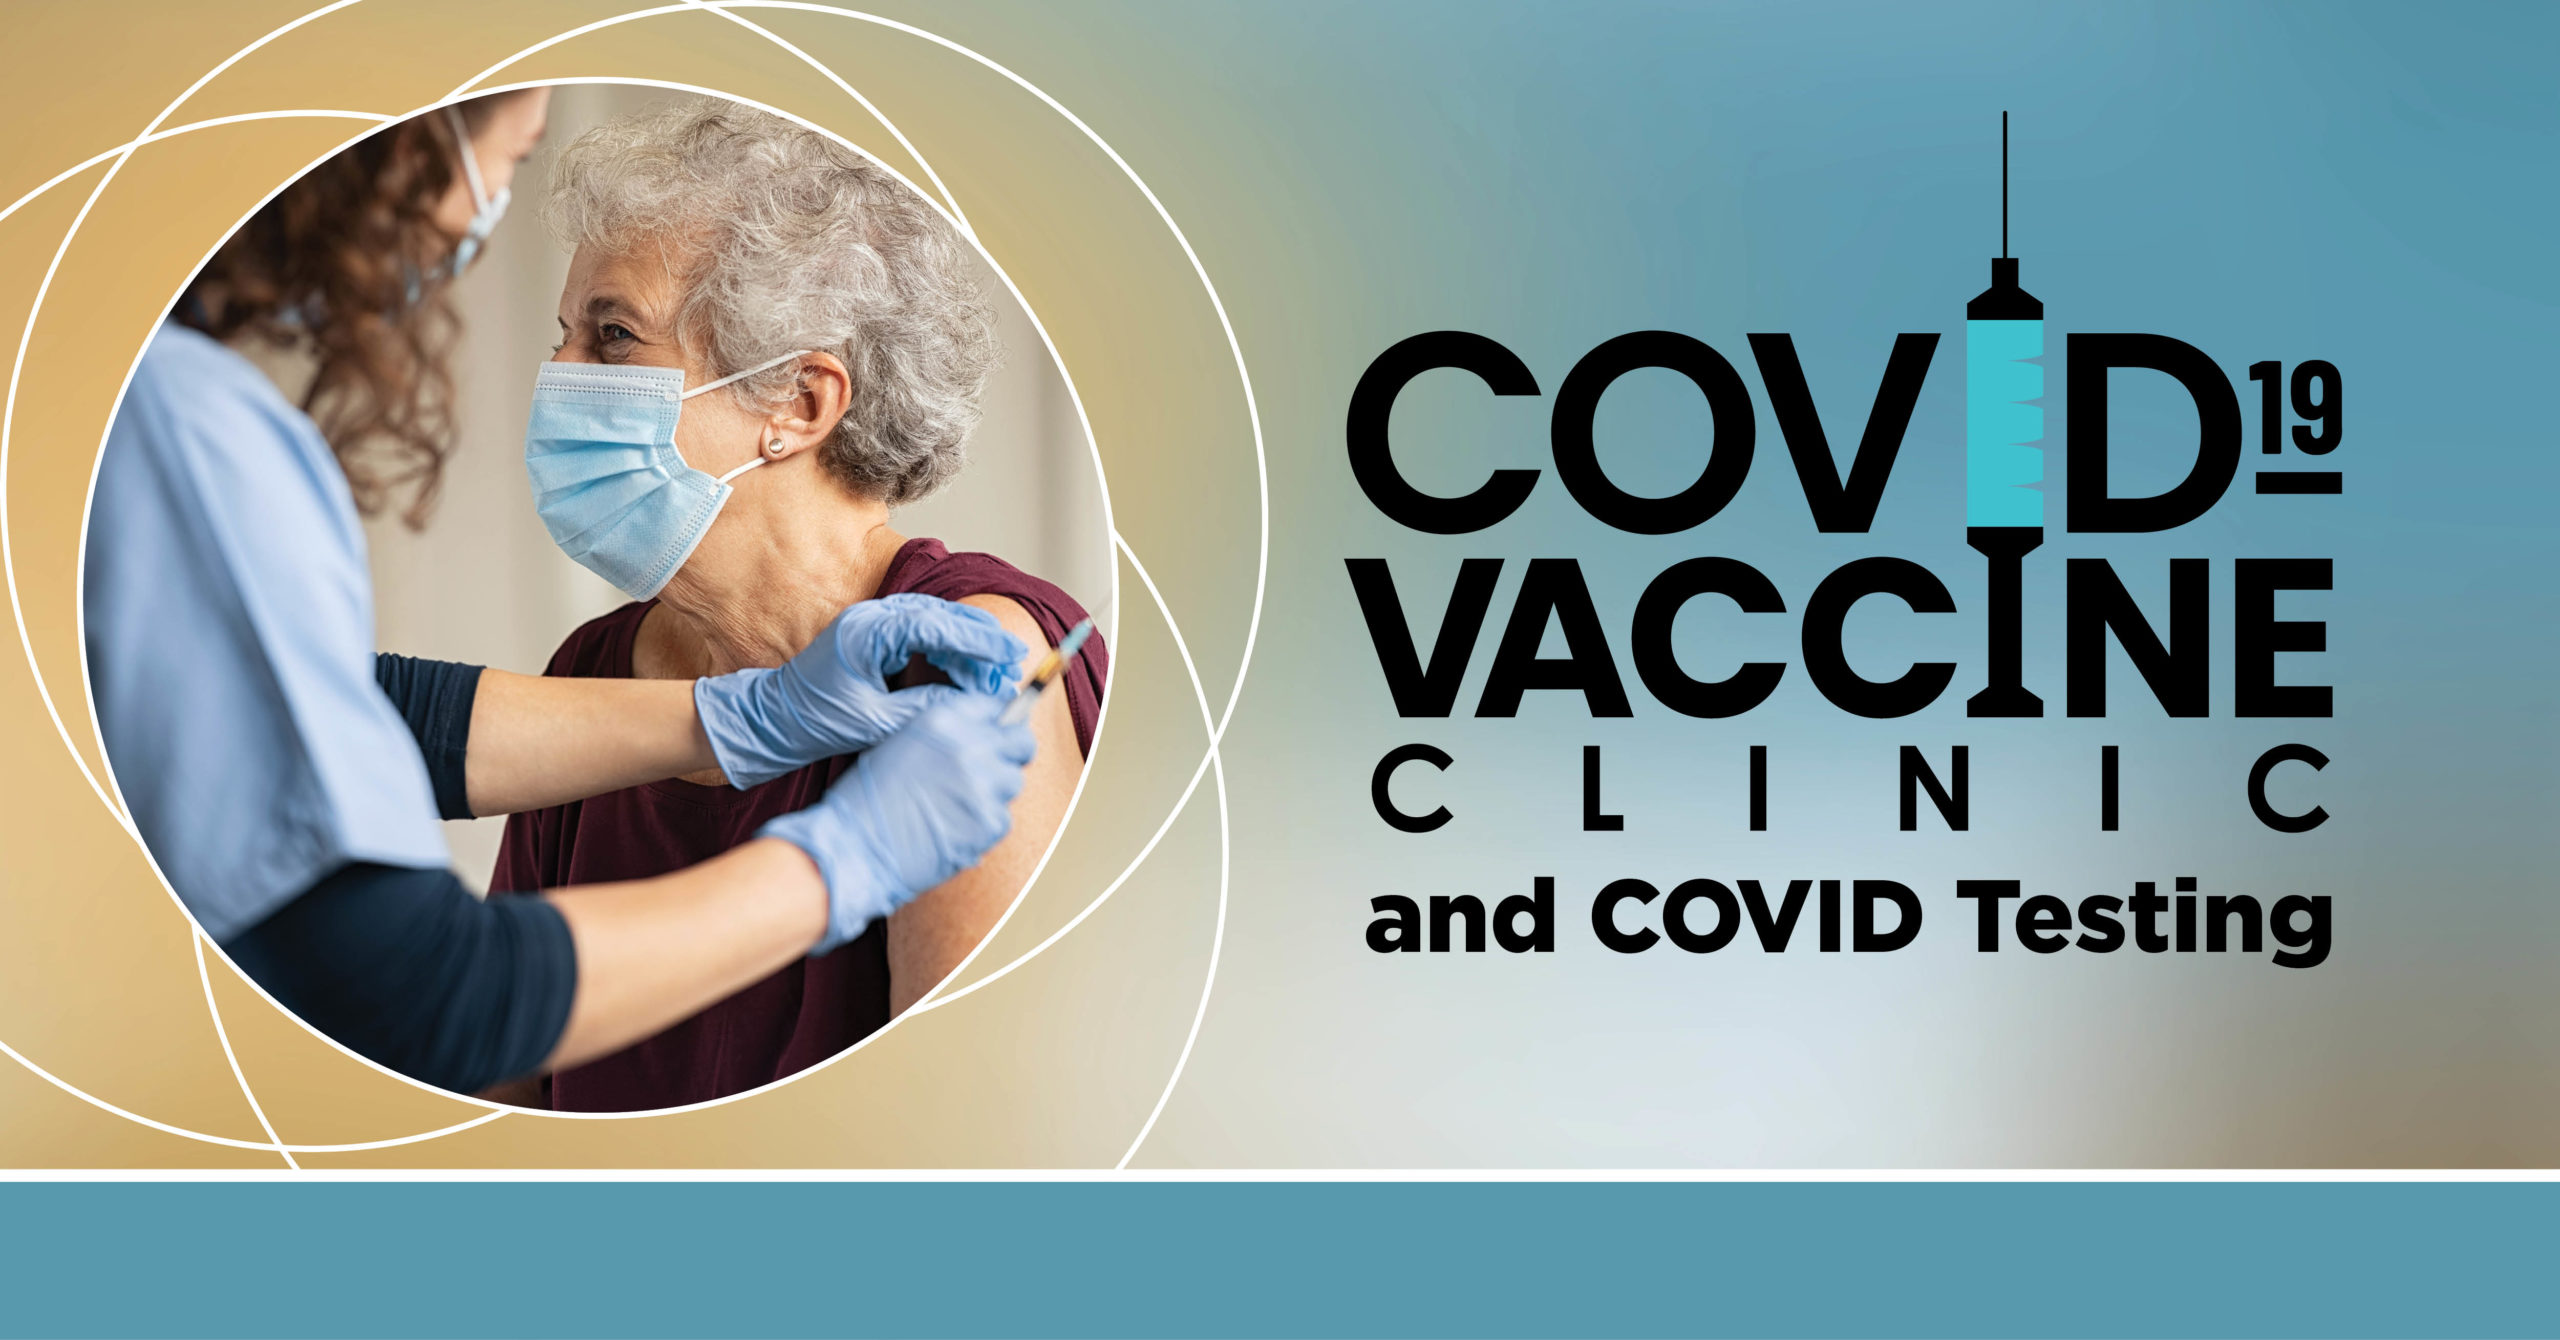 COVID Vaccine and Testing scaled